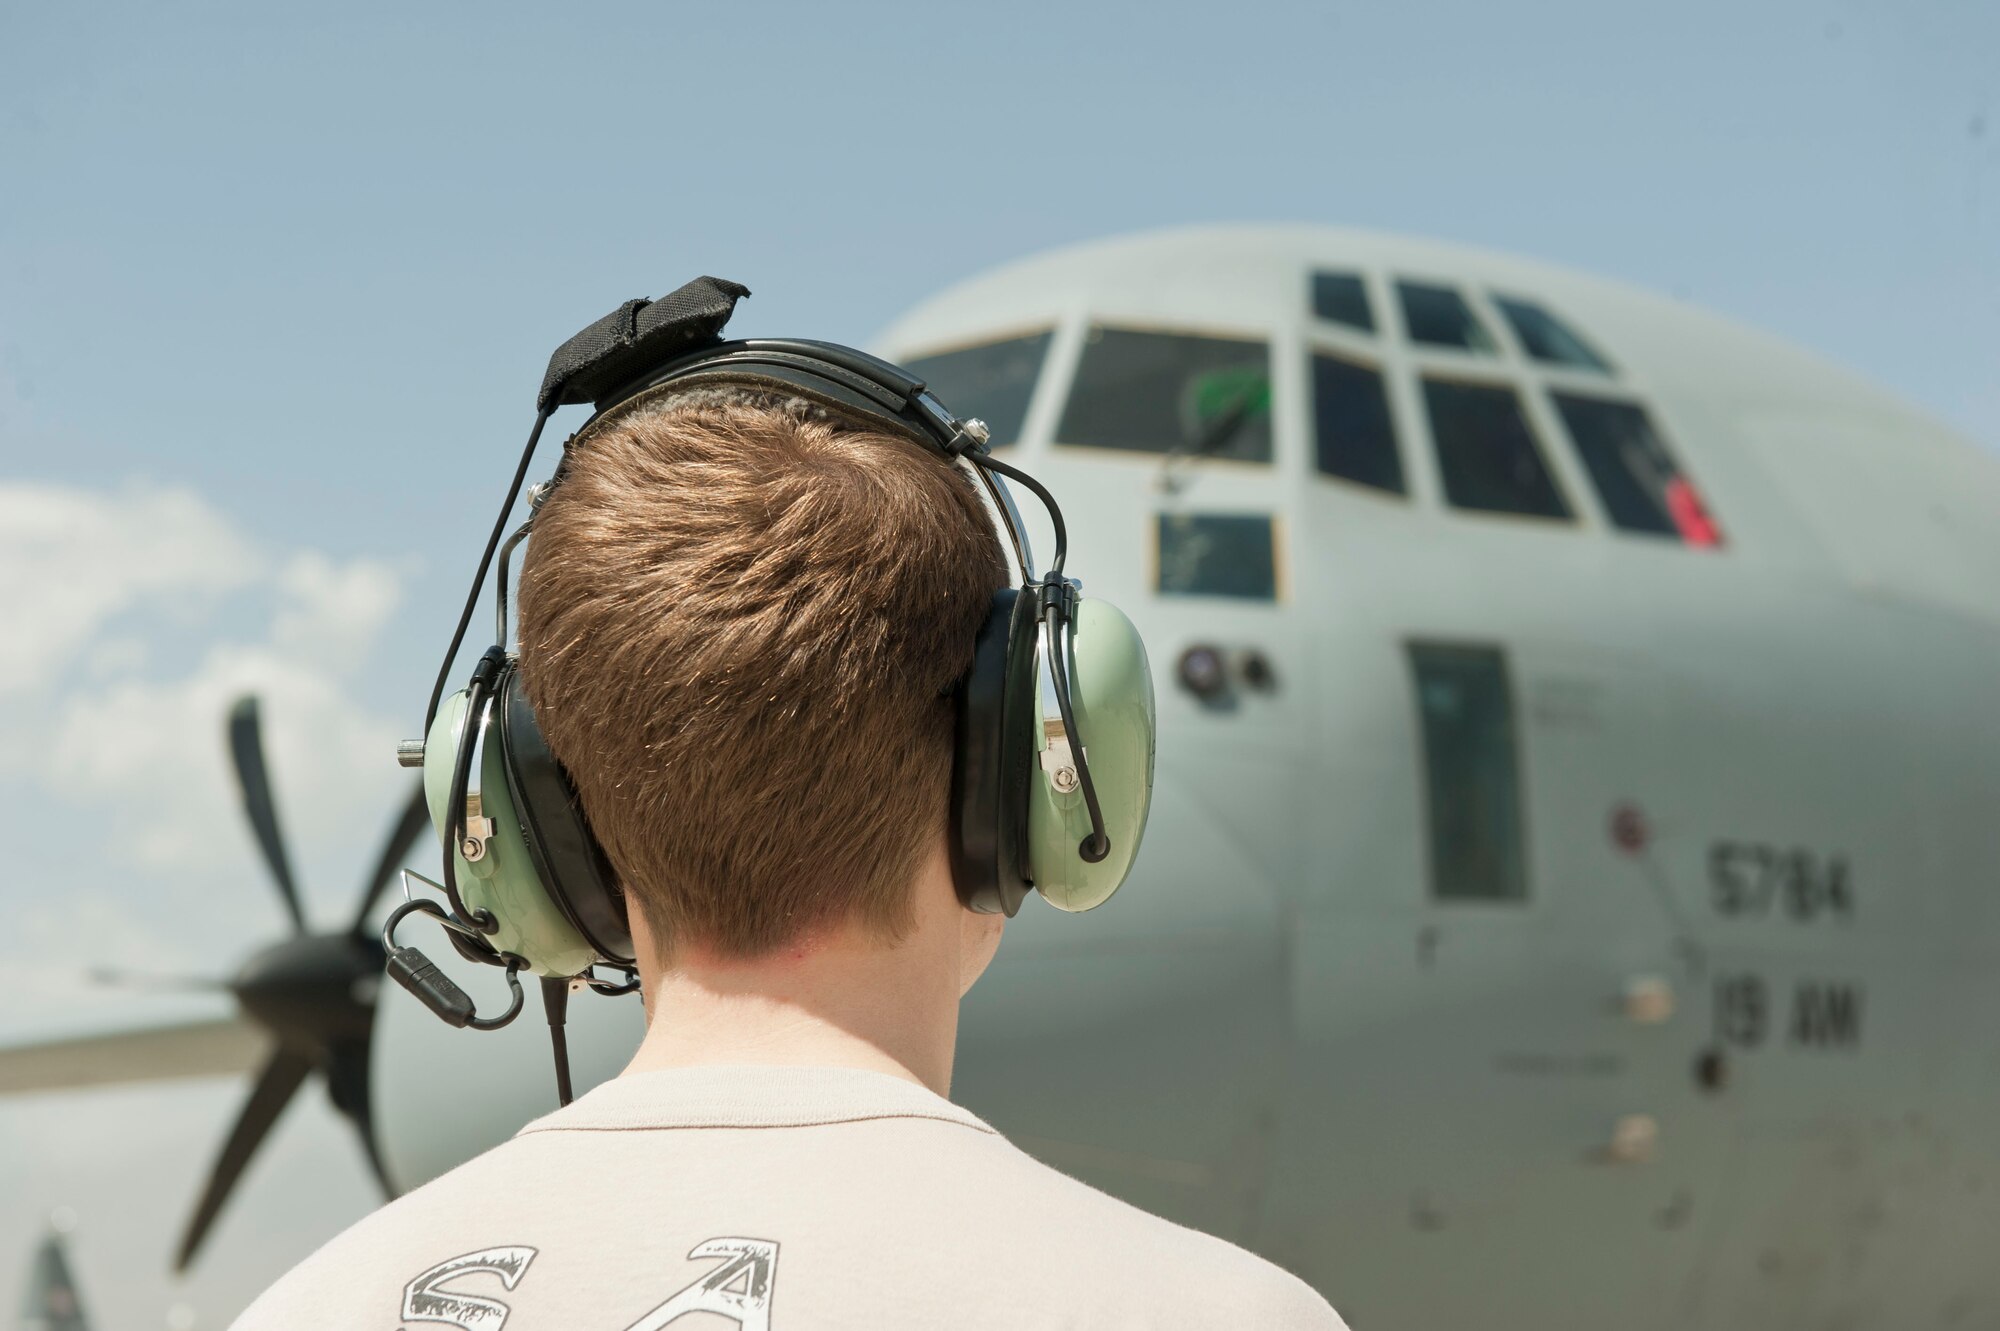 Senior Airman Austin Bryson, 774th Expeditionary Airlift Squadron C-130J Super Hercules loadmaster, communicates with pilots in the cockpit of a C-130J while
pre-flight checklists were completed, Bagram Airfield, Afghanistan, Aug. 19, 2016. Loadmasters assist pilots to ensure that the aircraft properly starts prior to flight operations beginning. (U.S. Air Force photo by Capt. Korey
Fratini)